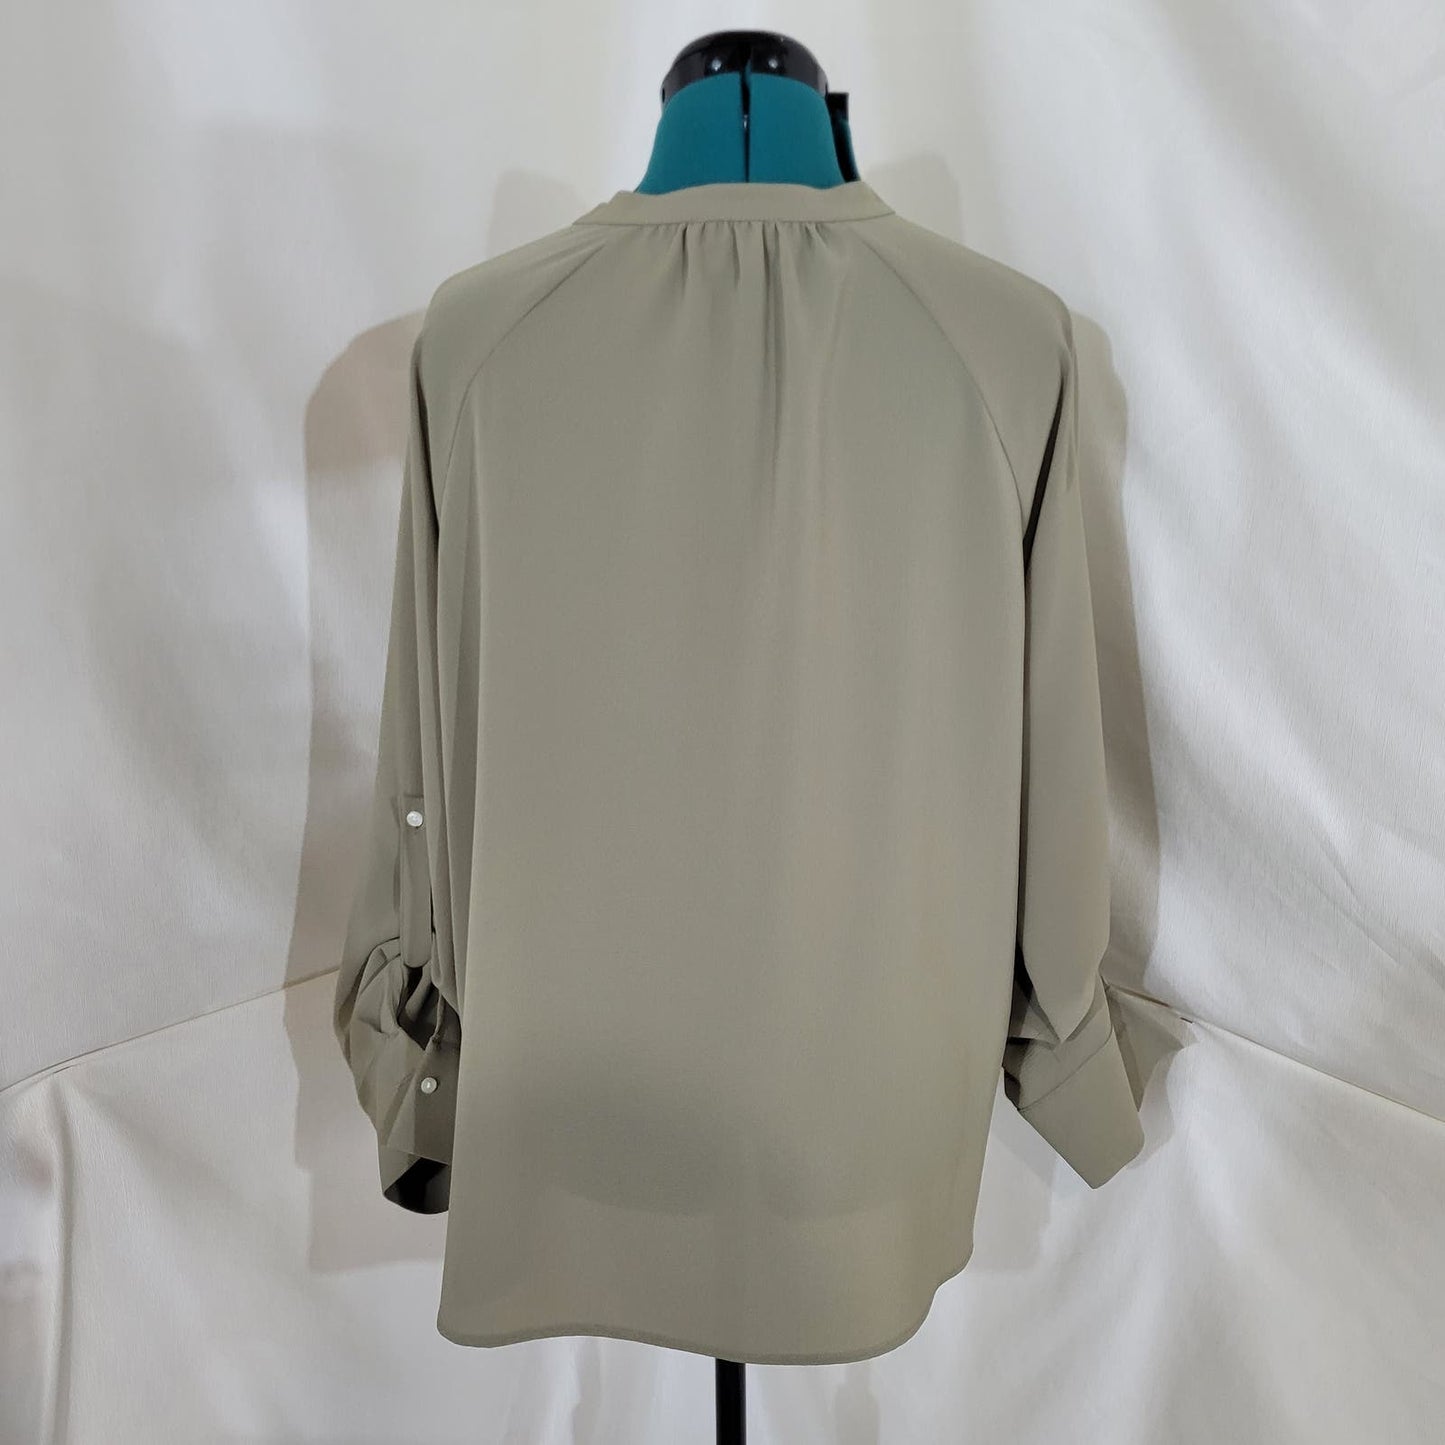 Lord & Taylor Crepe 3/4 Blouse - Size Large